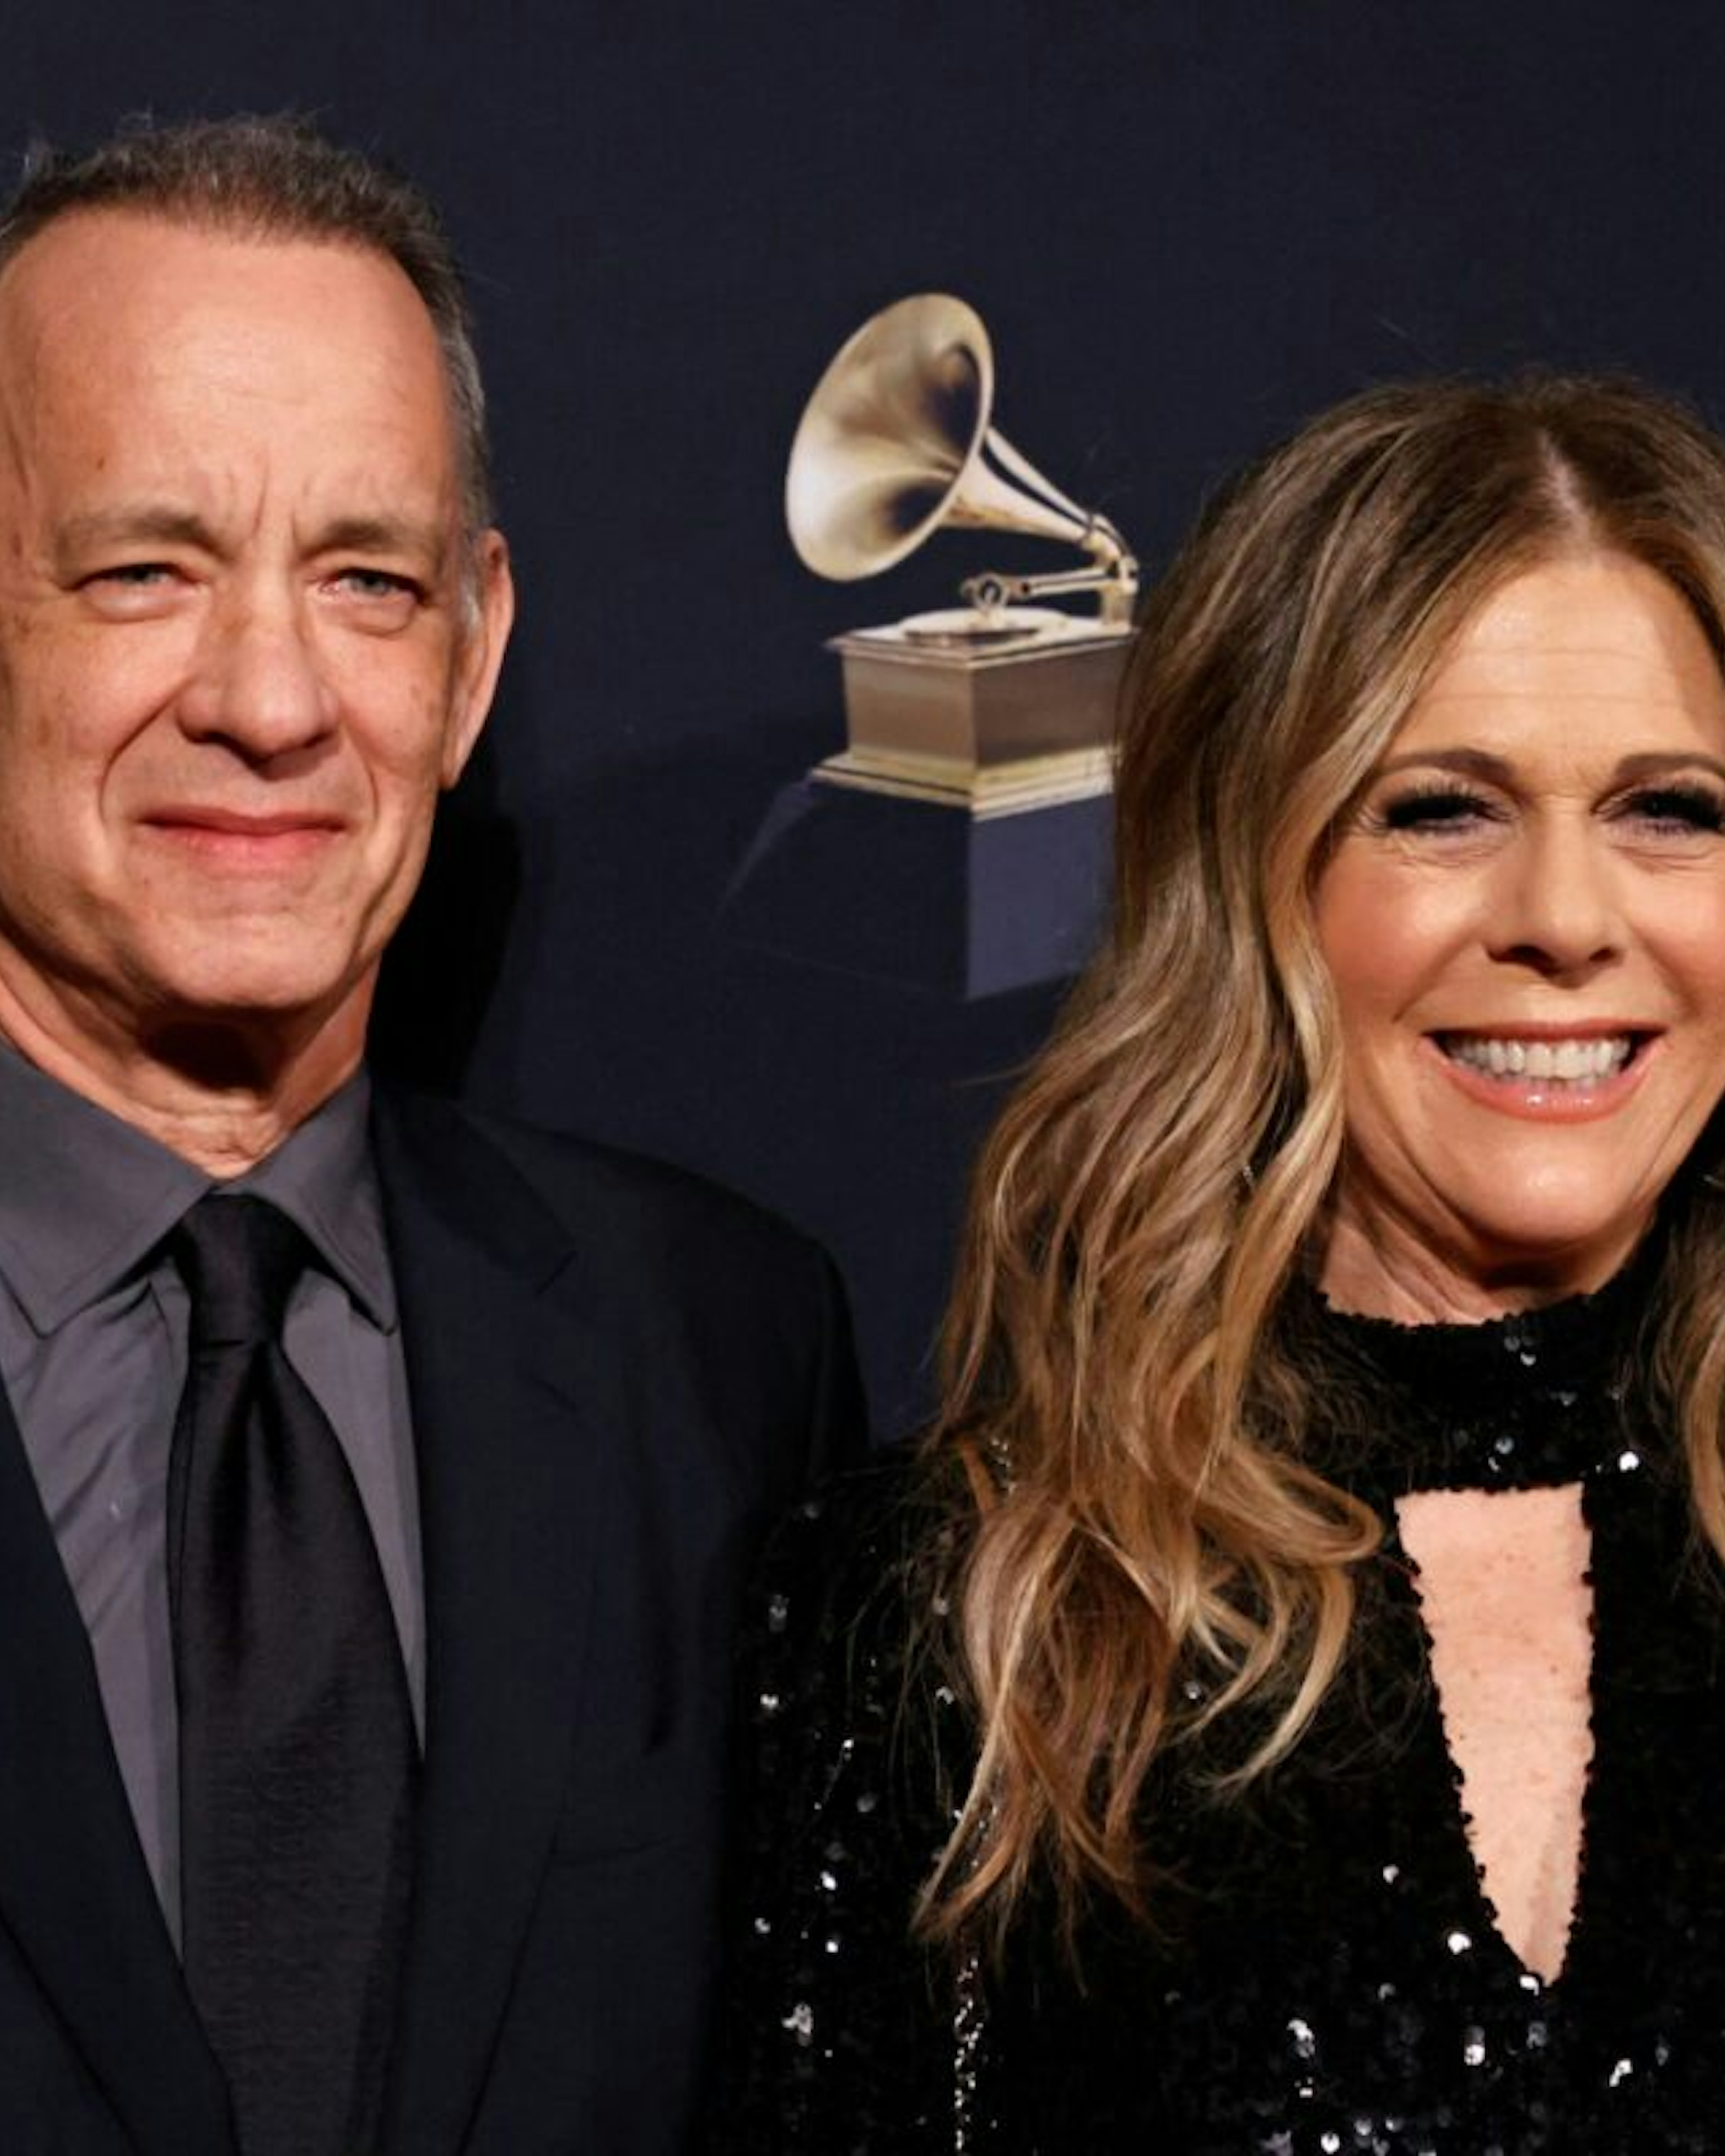 US actor Tom Hanks (L) and his wife US singer and actress Rita Wilson arrive for the Recording Academy and Clive Davis pre-Grammy gala at the Beverly Hilton hotel in Beverly Hills, California on February 4, 2023. (Photo by Michael TRAN / AFP) (Photo by MICHAEL TRAN/AFP via Getty Images)